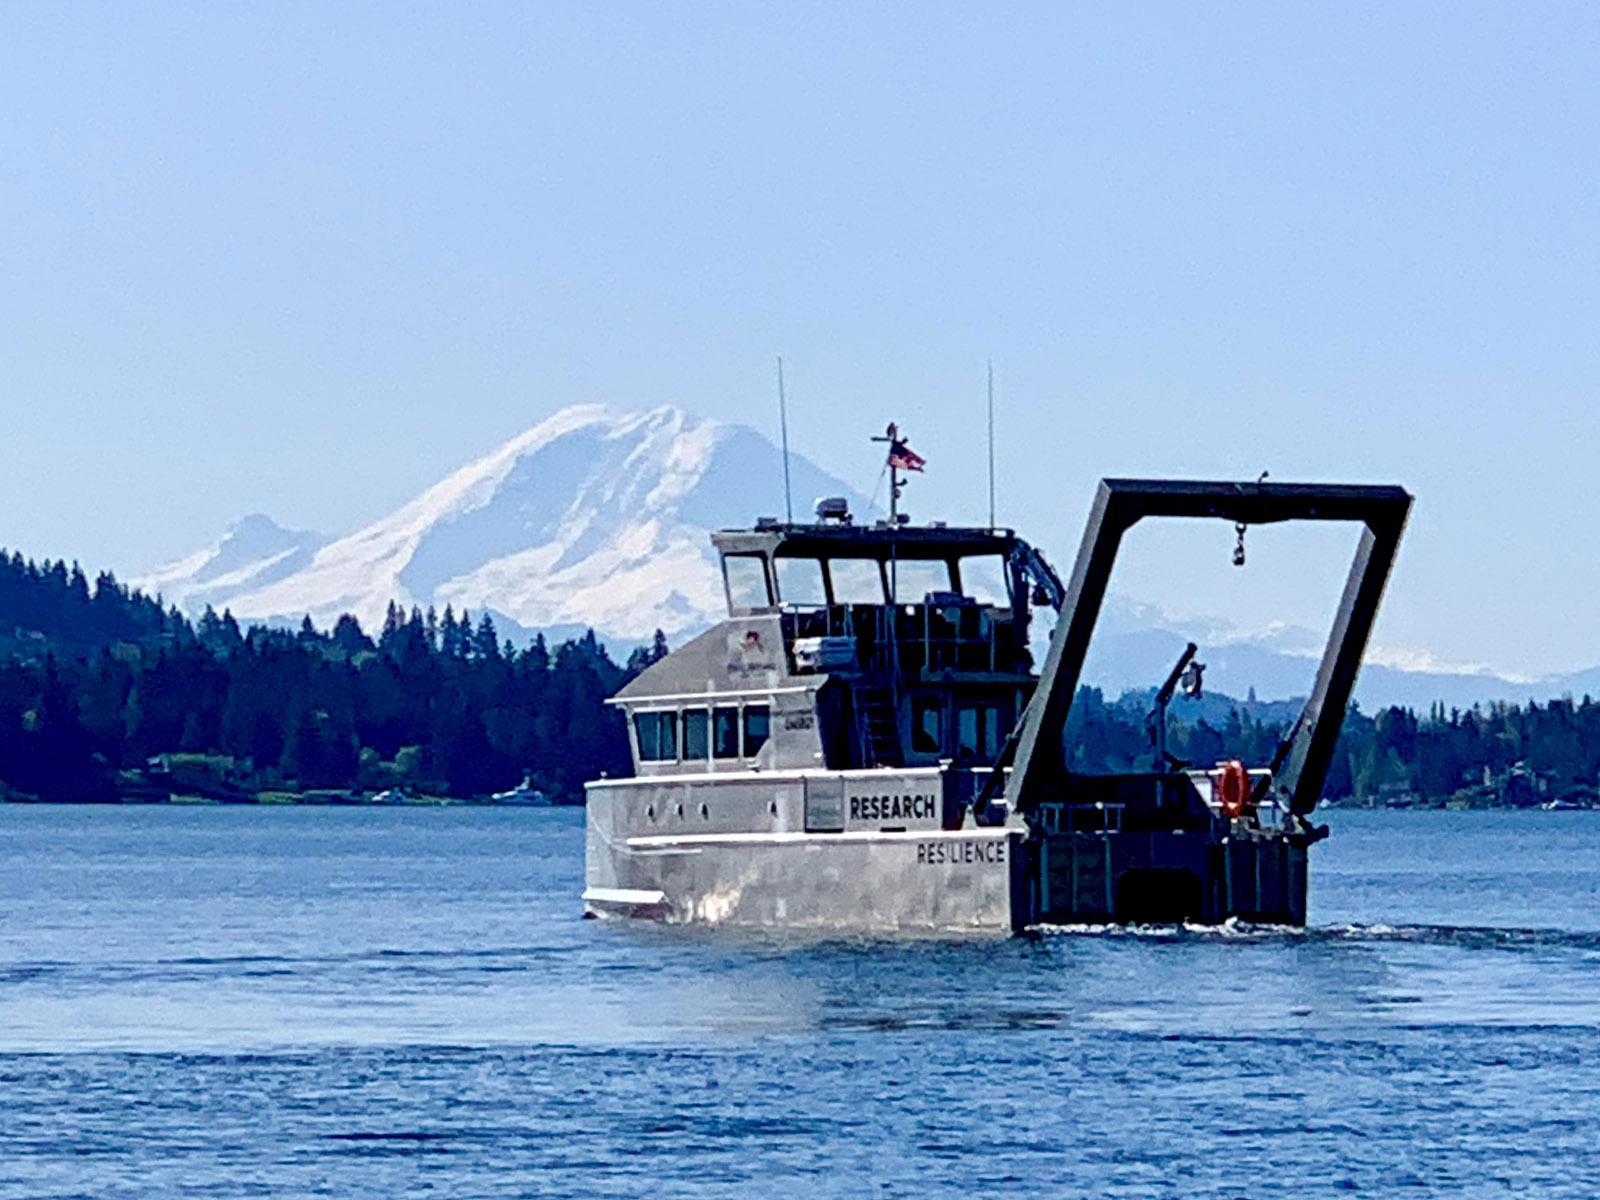 RV Resilience cruises with Mt Rainier in the background.